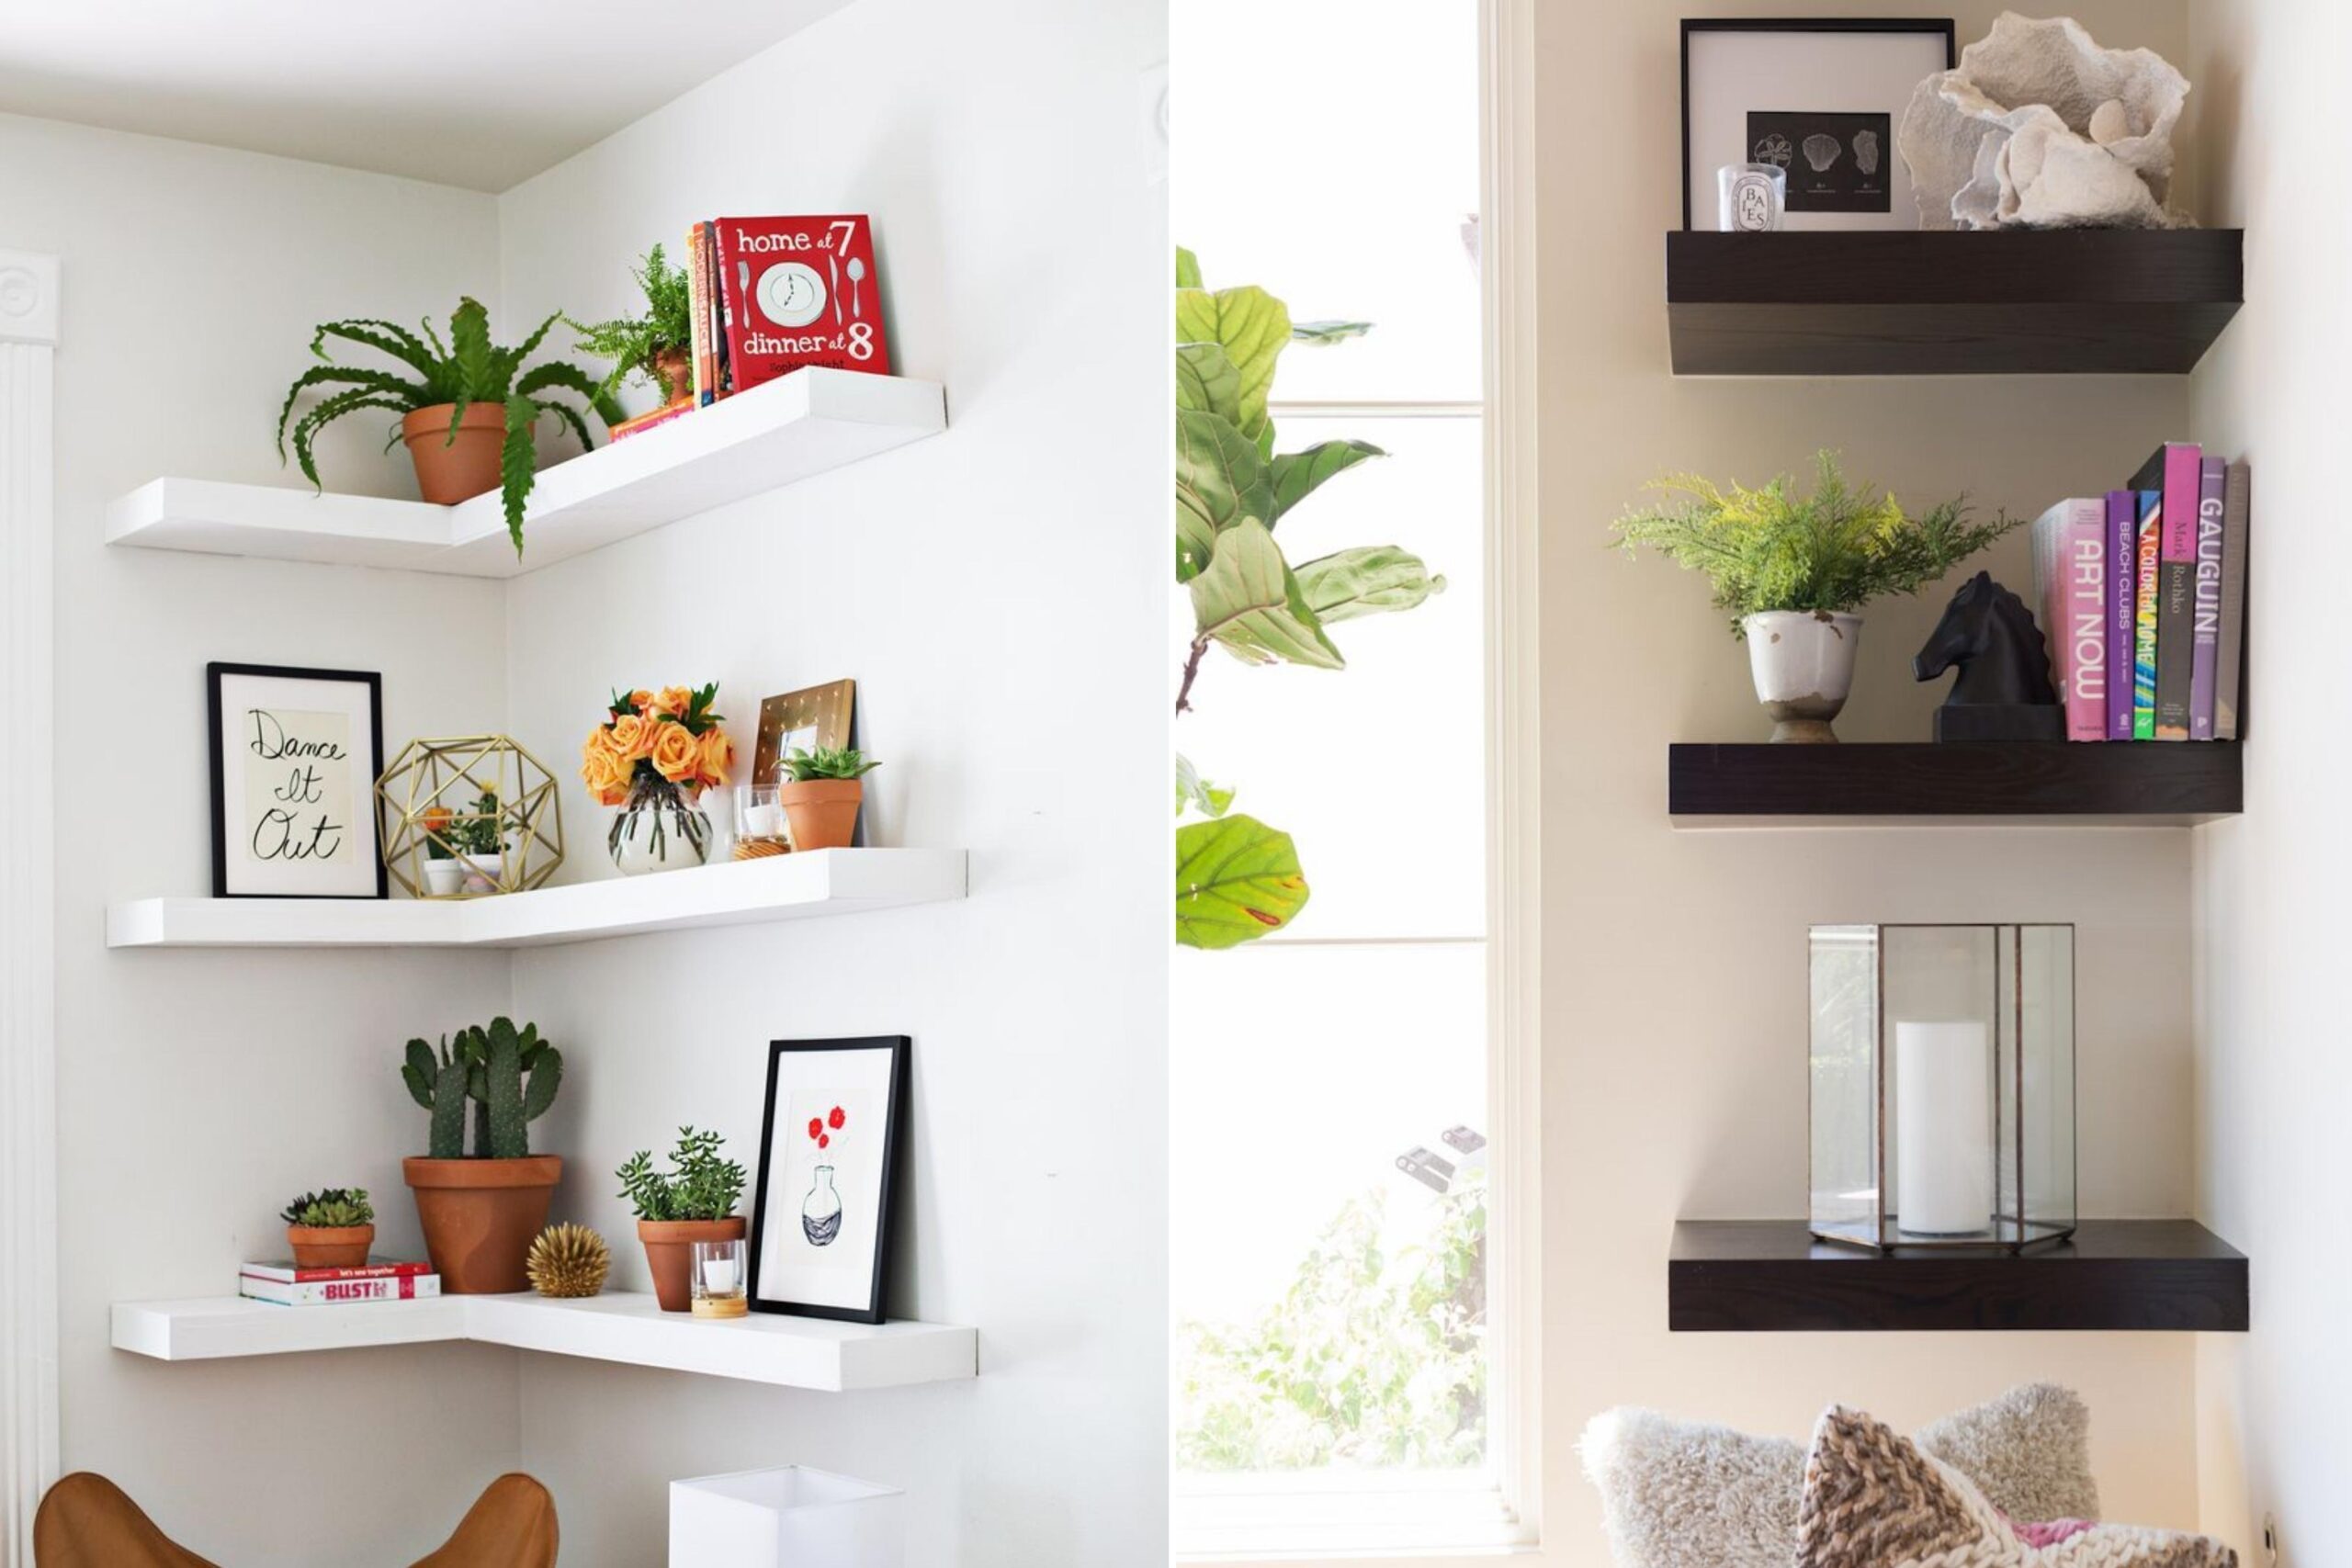 20 Living Room Corner Ideas You Should Definitely Try Out In 20